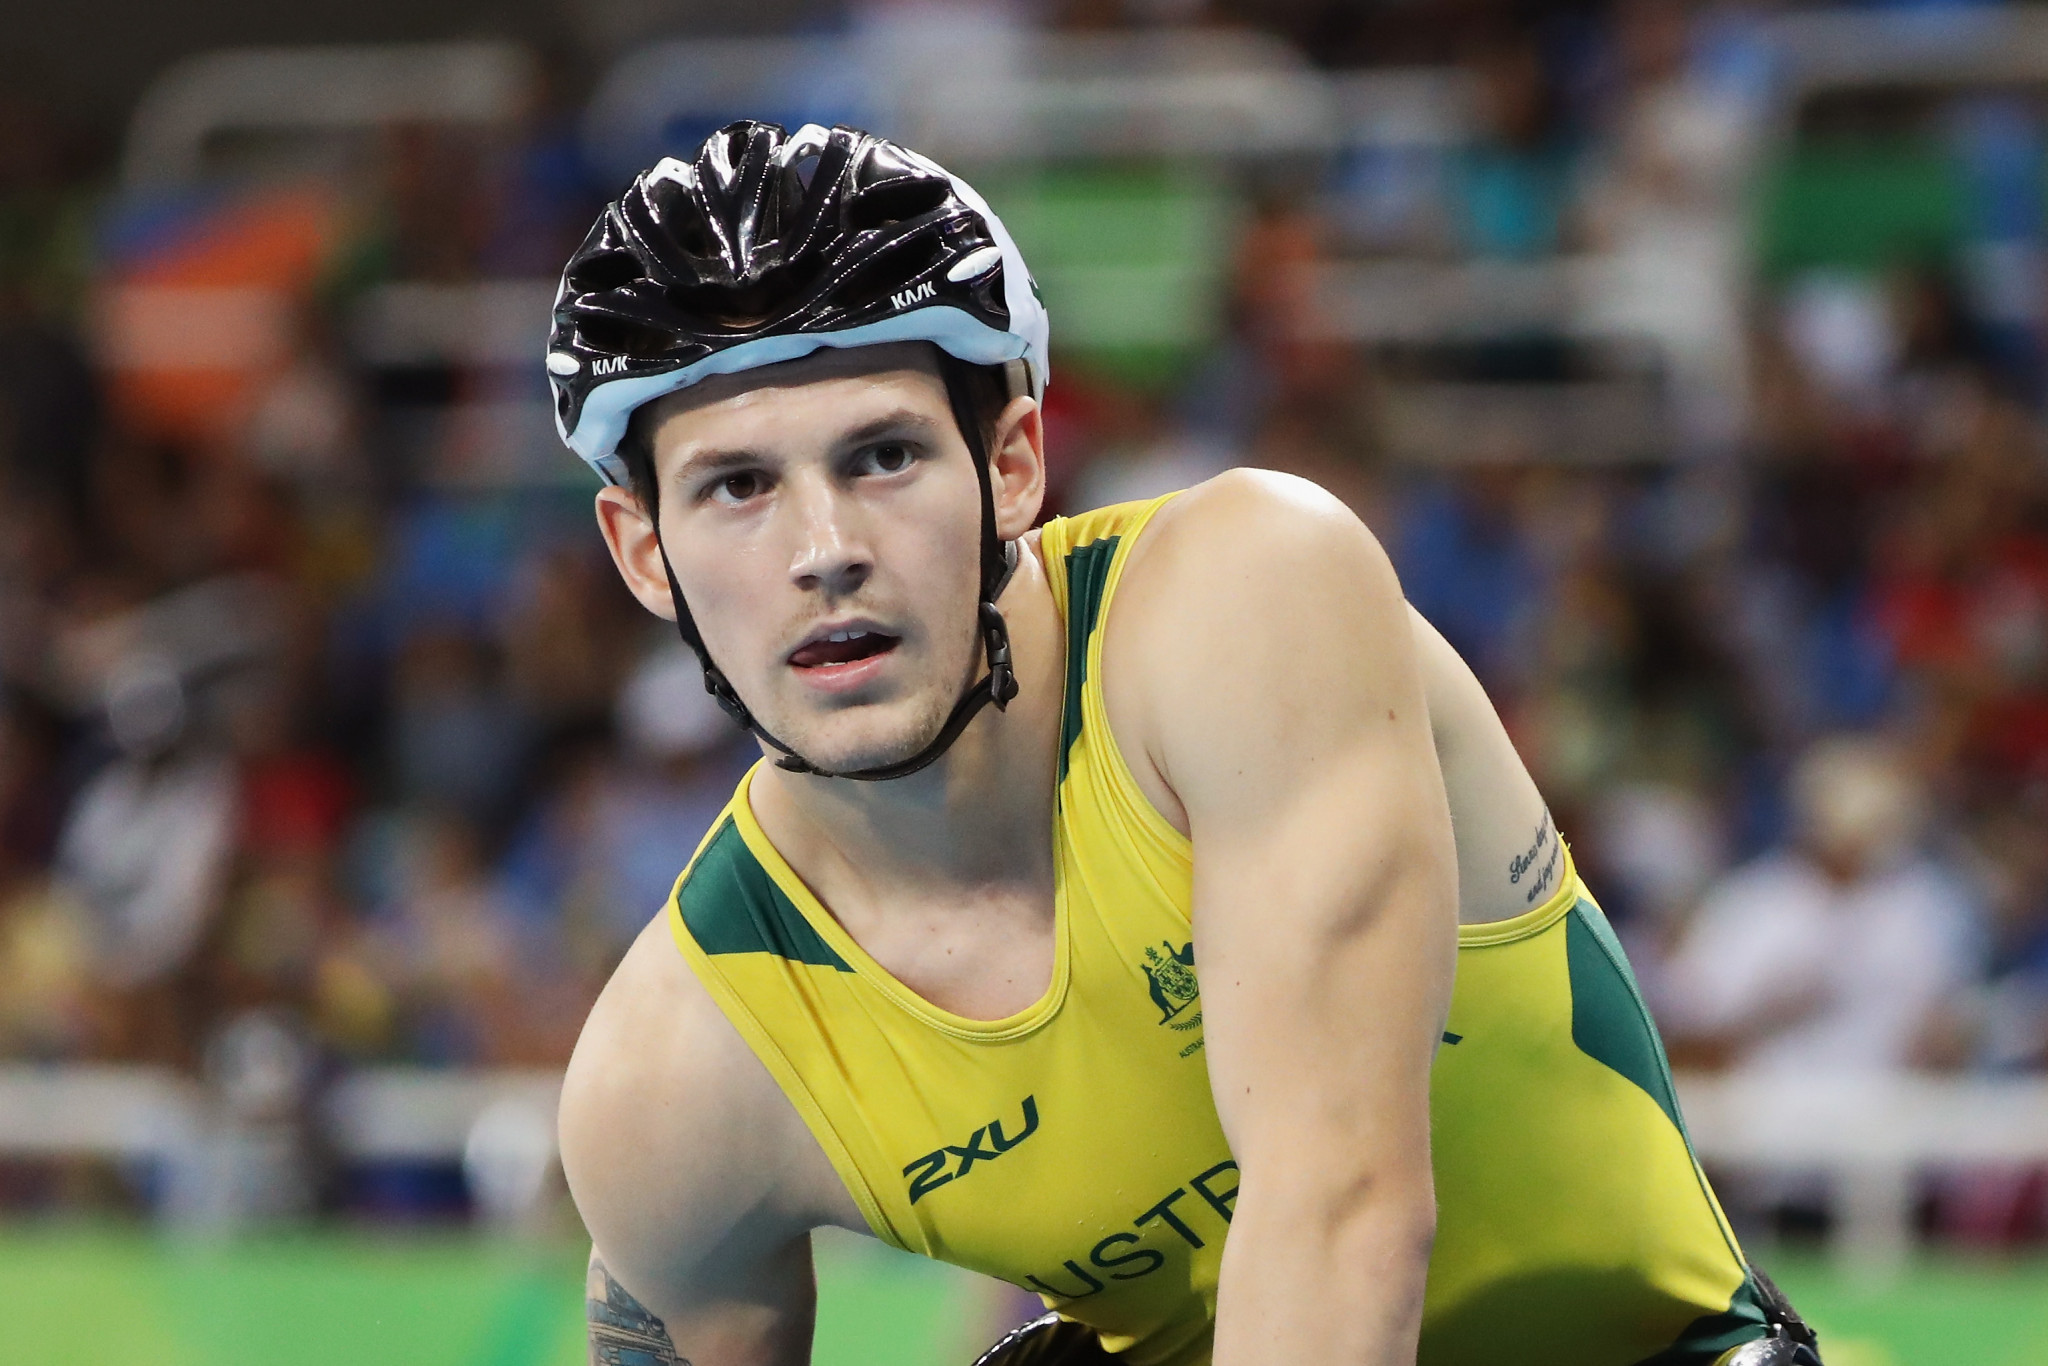 Rheed McCracken forms part of a strong Australian contingent set to compete at the World Para Athletics Grand Prix in Nottwil in Switzerland ©Getty Images